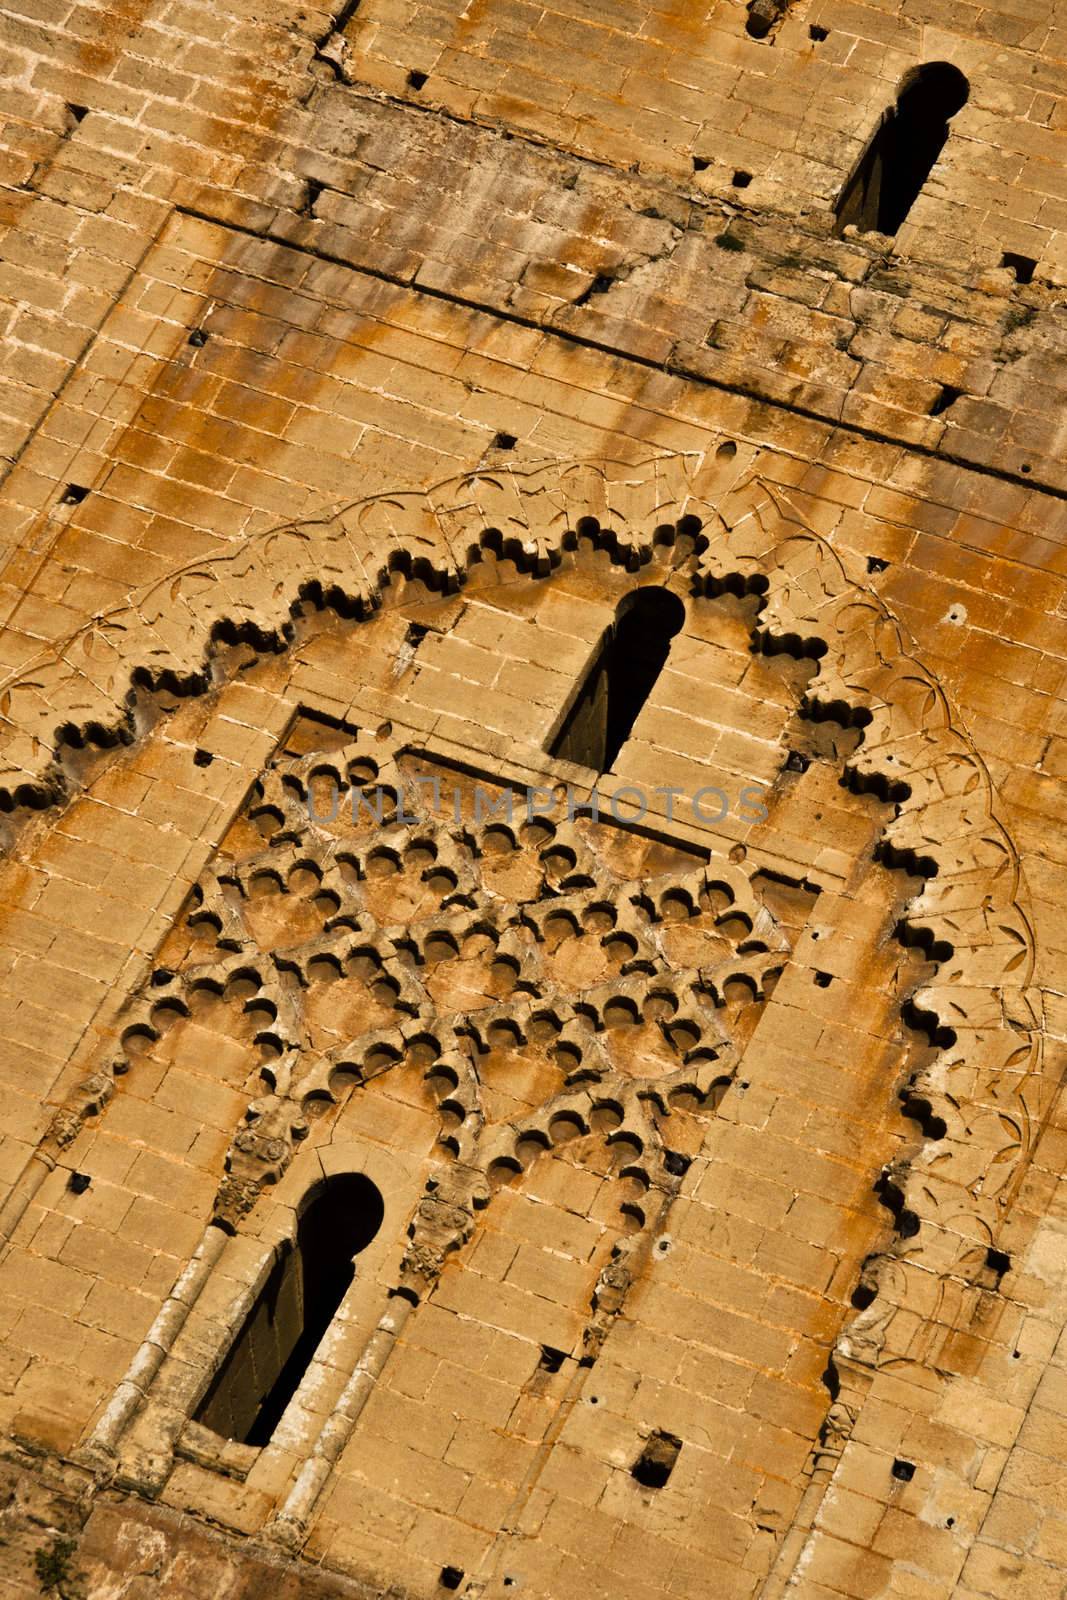 Hassan Tower, minaret of an unfinished twelfth_century mosque in Rabat, Morocco, North Africa